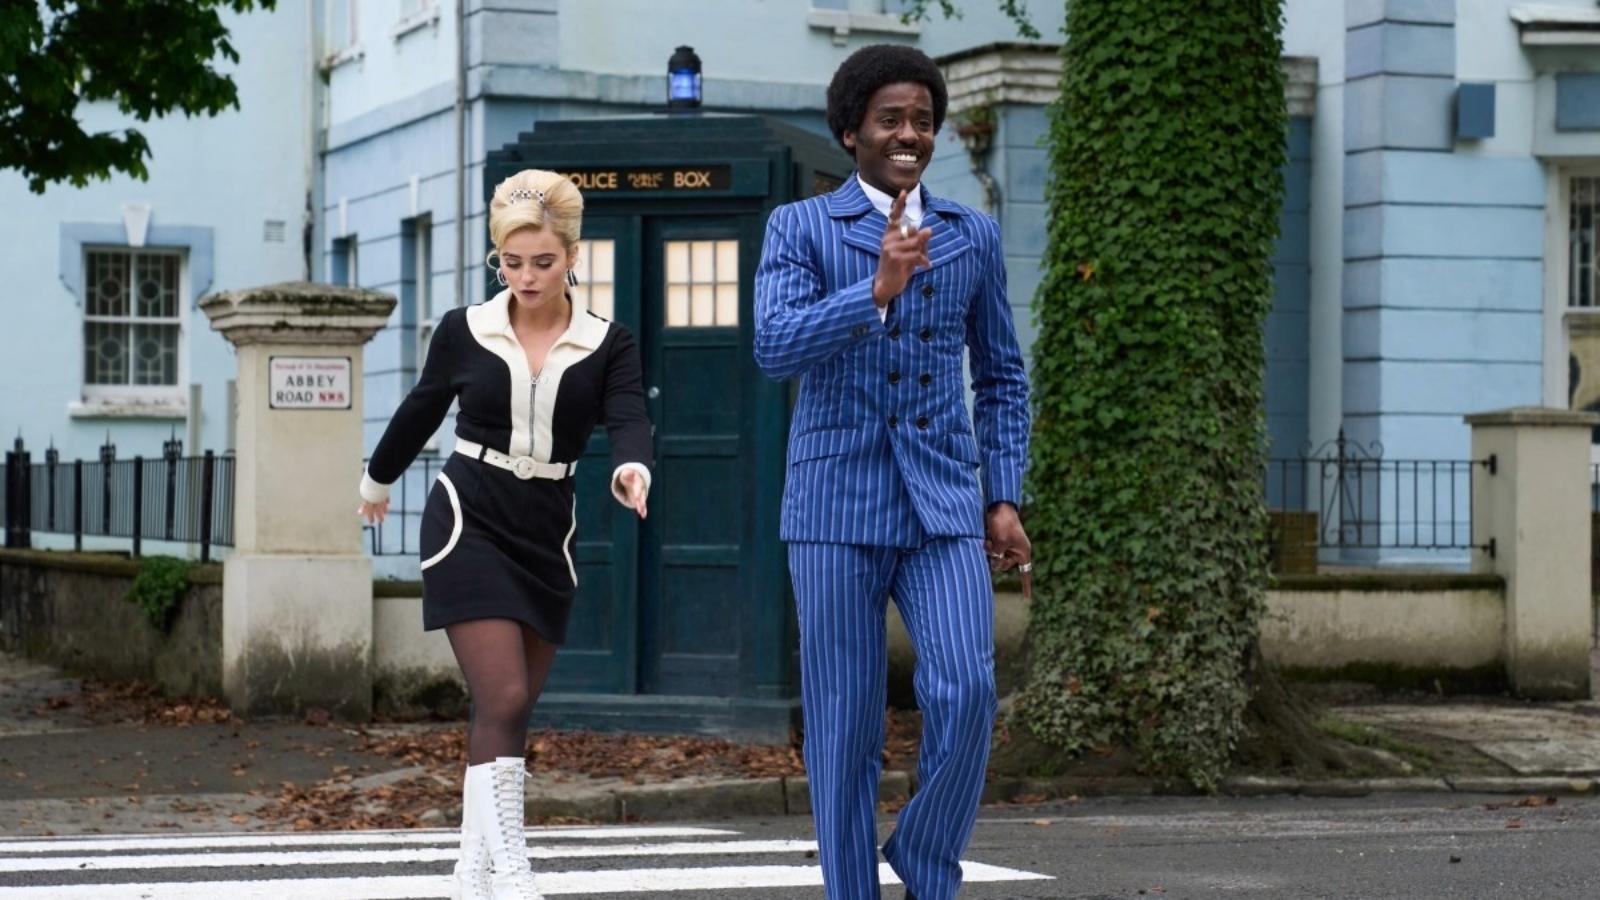 Millie Gibson as Ruby Sunday and Ncuti Gatwa as the Doctor in Doctor Who Season 14 Episode 2